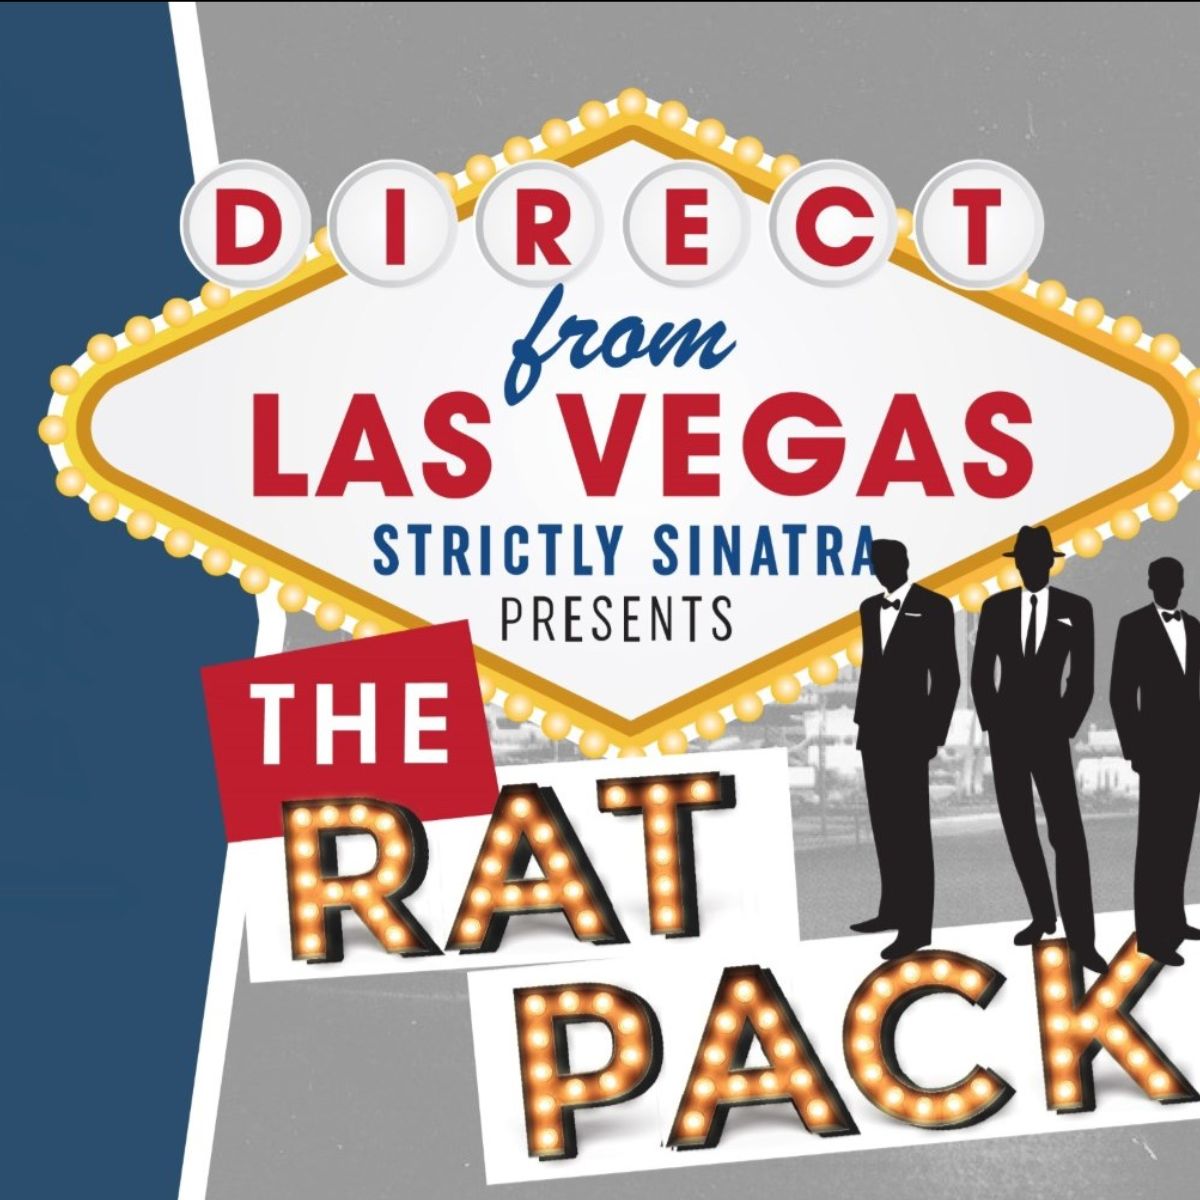 Calendar of Events Strictly Sinatra presents The Rat Pack Holiday